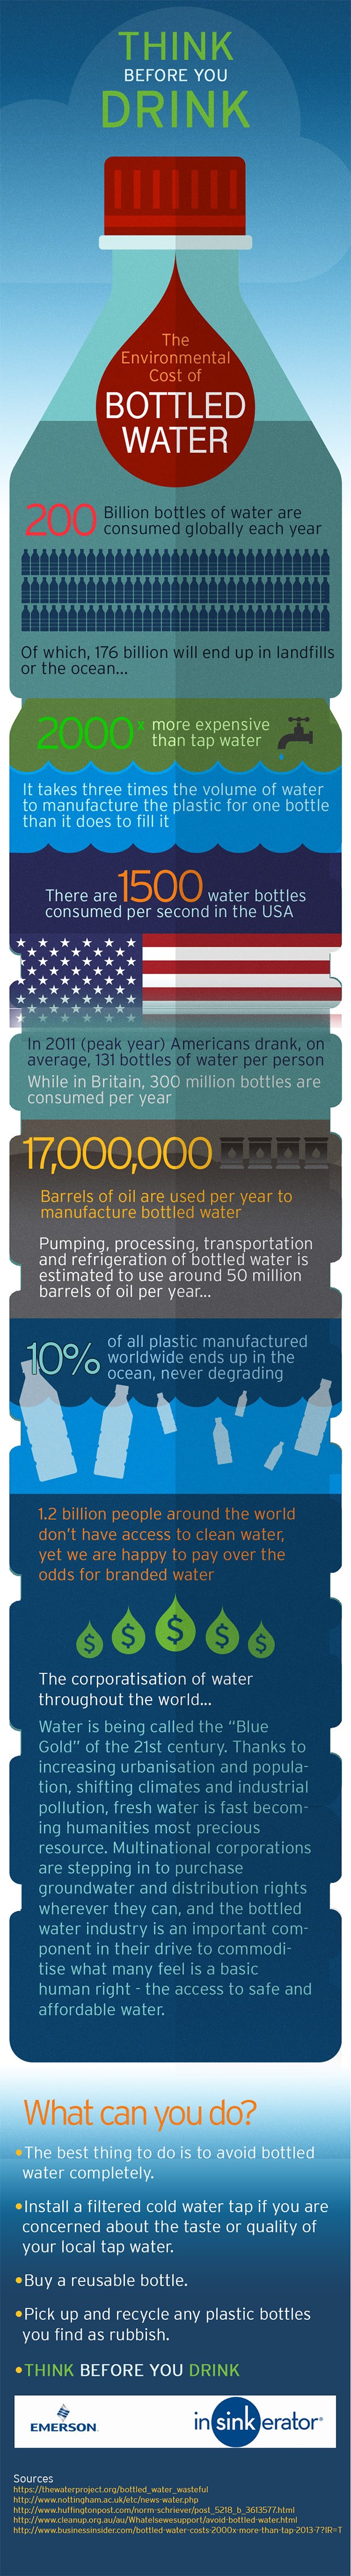 Environmental Cost of Bottled Water